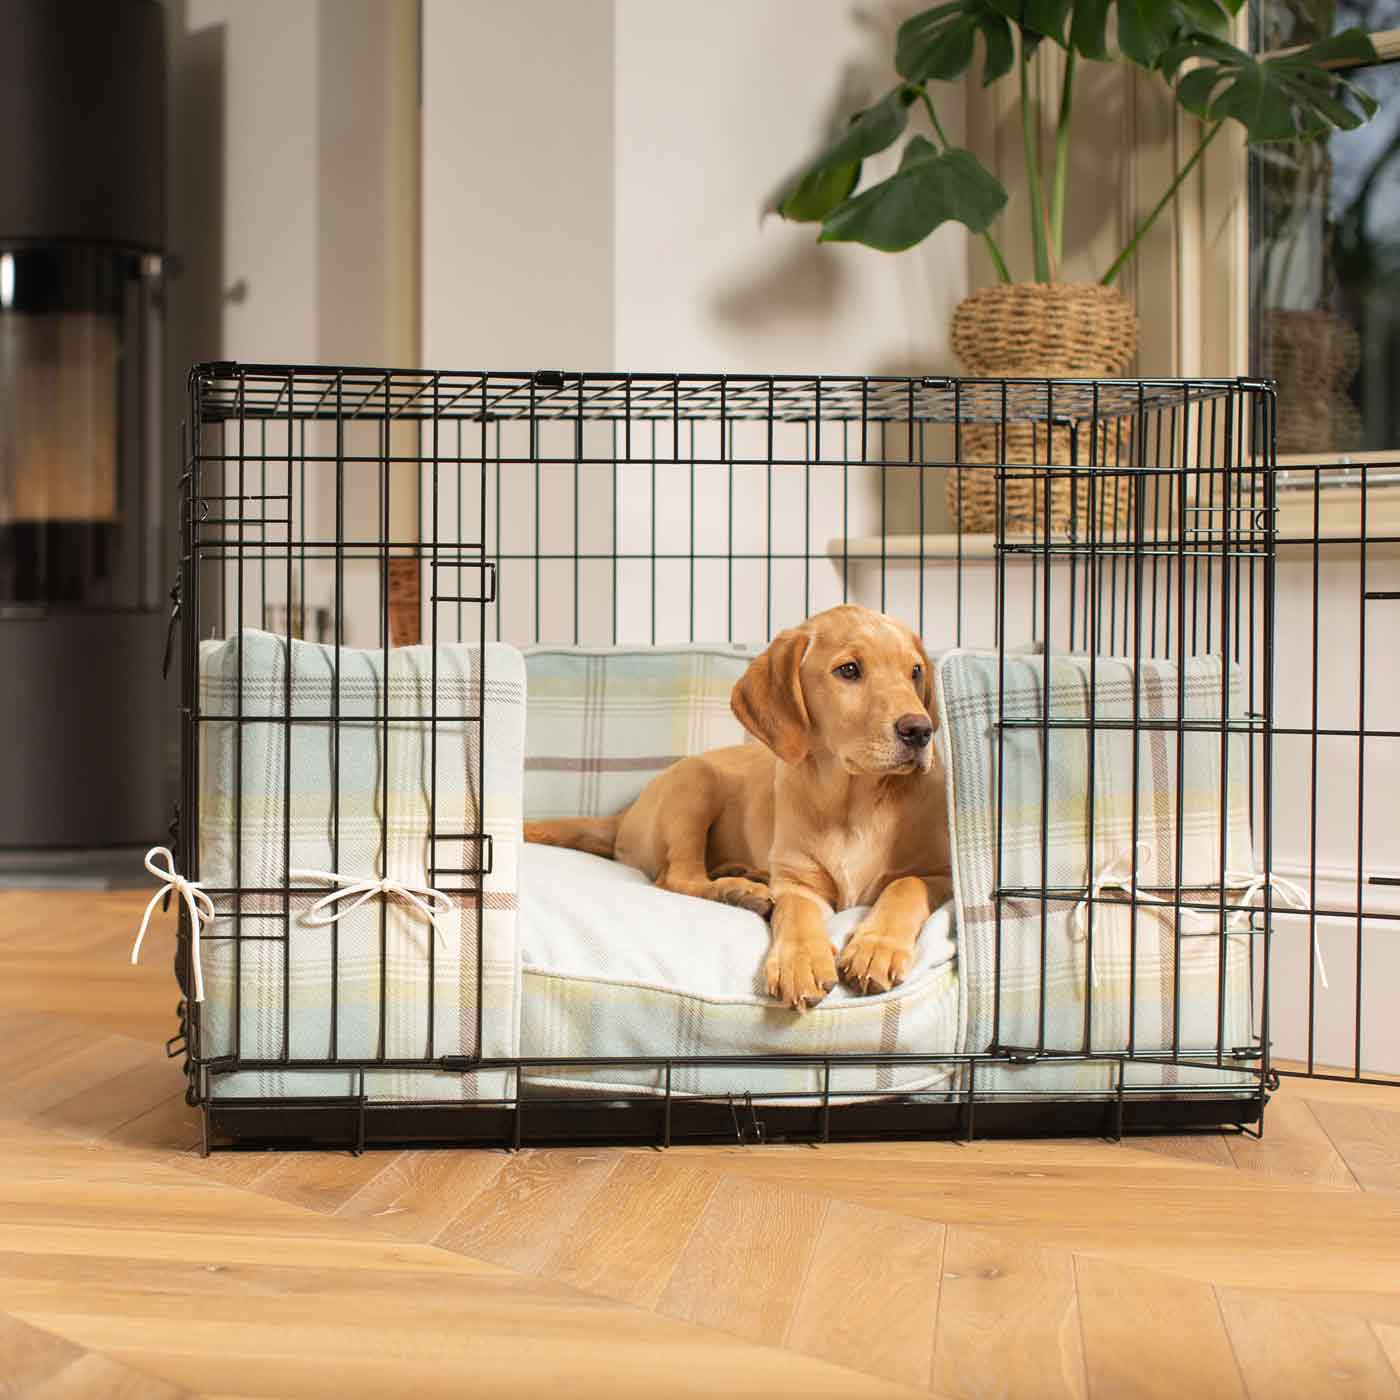 Luxury Dog Cage Bumper, Balmoral Duck Egg Cage Bumper Cover The Perfect Dog Cage Accessory, Available To Personalize Now at Lords & Labradors US